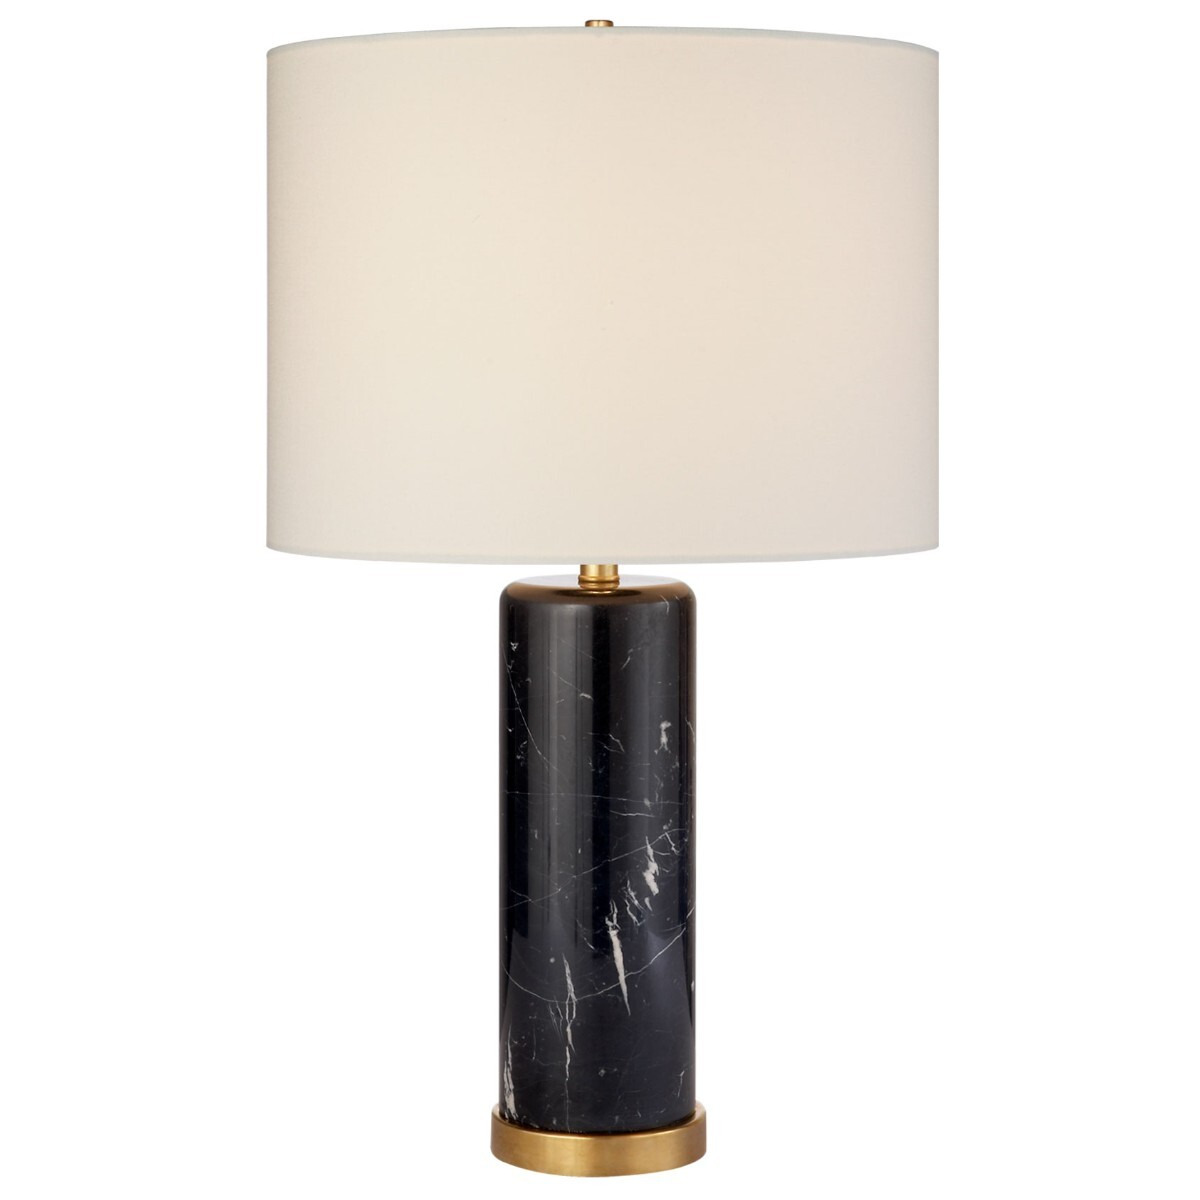 AERIN - Cliff Table Lamp - Black Marble